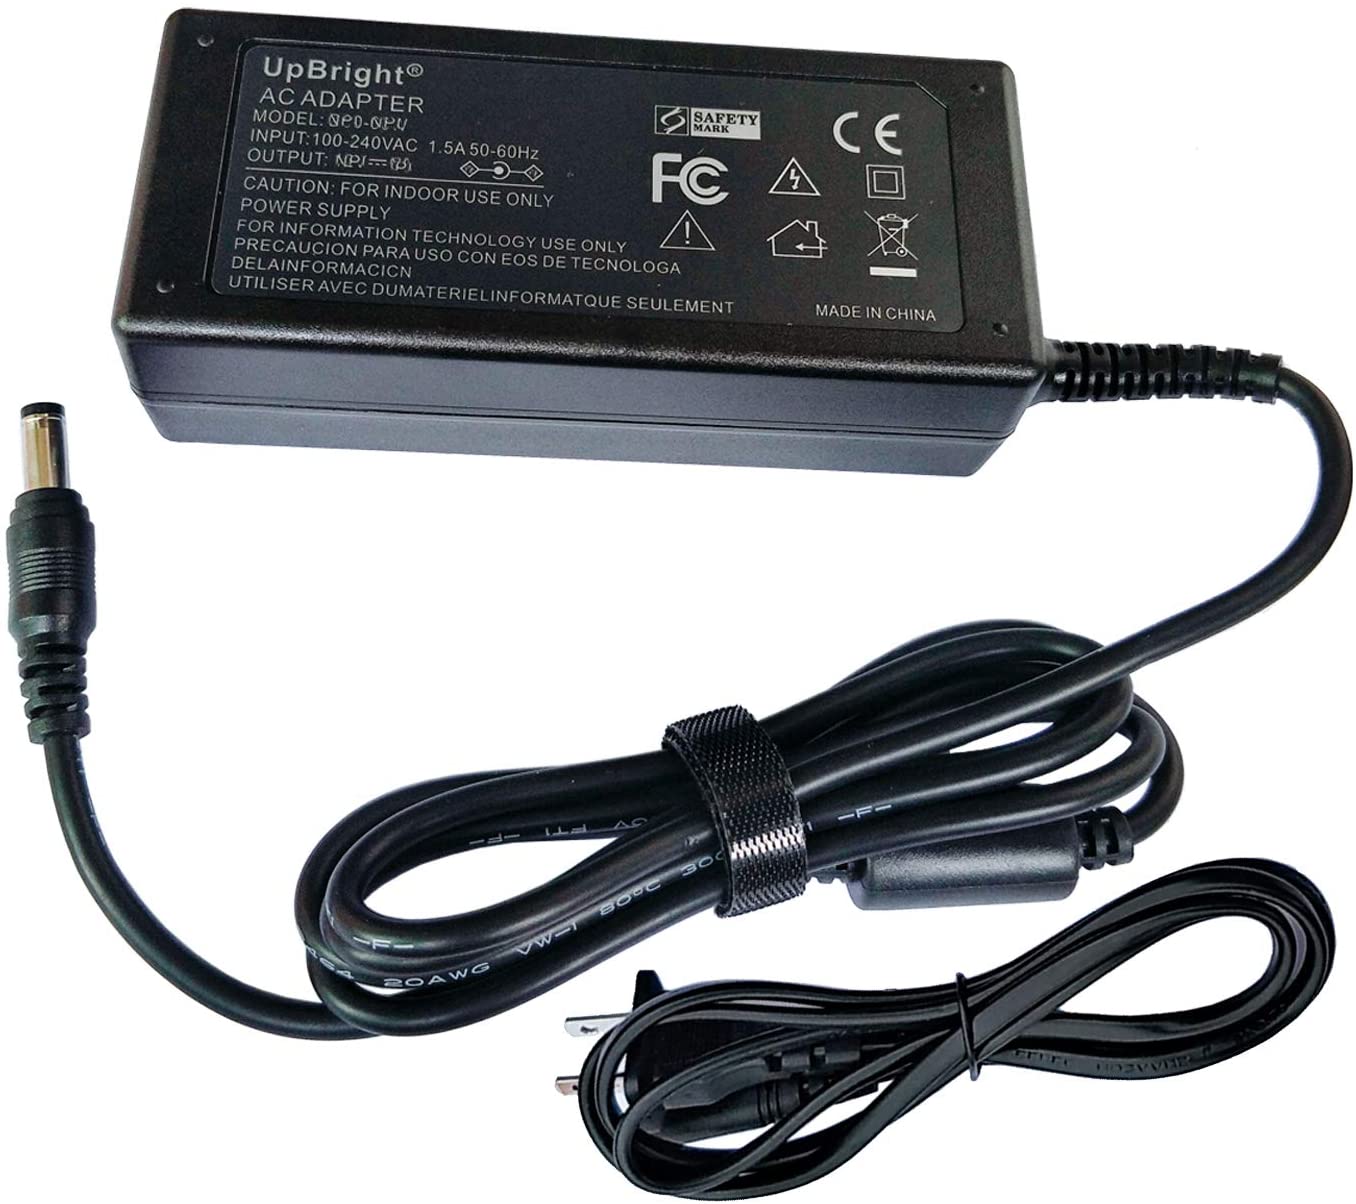 UPBRIGHT NEW Global AC / DC Adapter For AXIS T8006 PS12 Power Supply Fits AXIS Q19 Series Network Camera 5030-062 5030-063 5030-064 5030-065 5030-066 5030-067 5030-068 5030-069 5030-112 - image 1 of 5